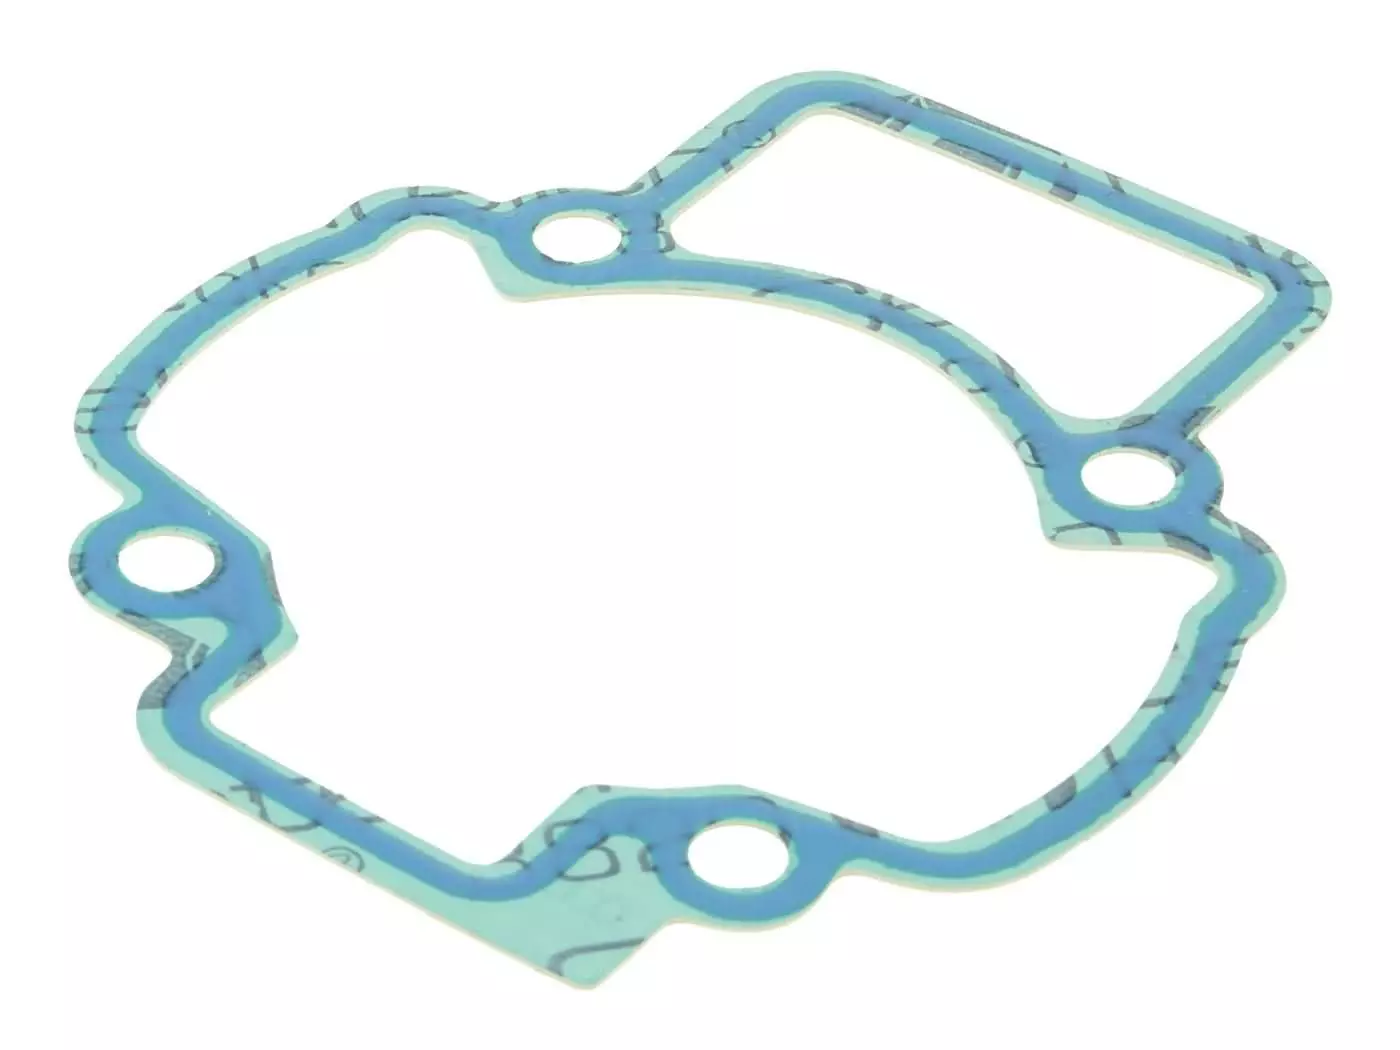 Cylinder Base Gasket Paper 0.80mm For Piaggio 50 LC 2-stroke